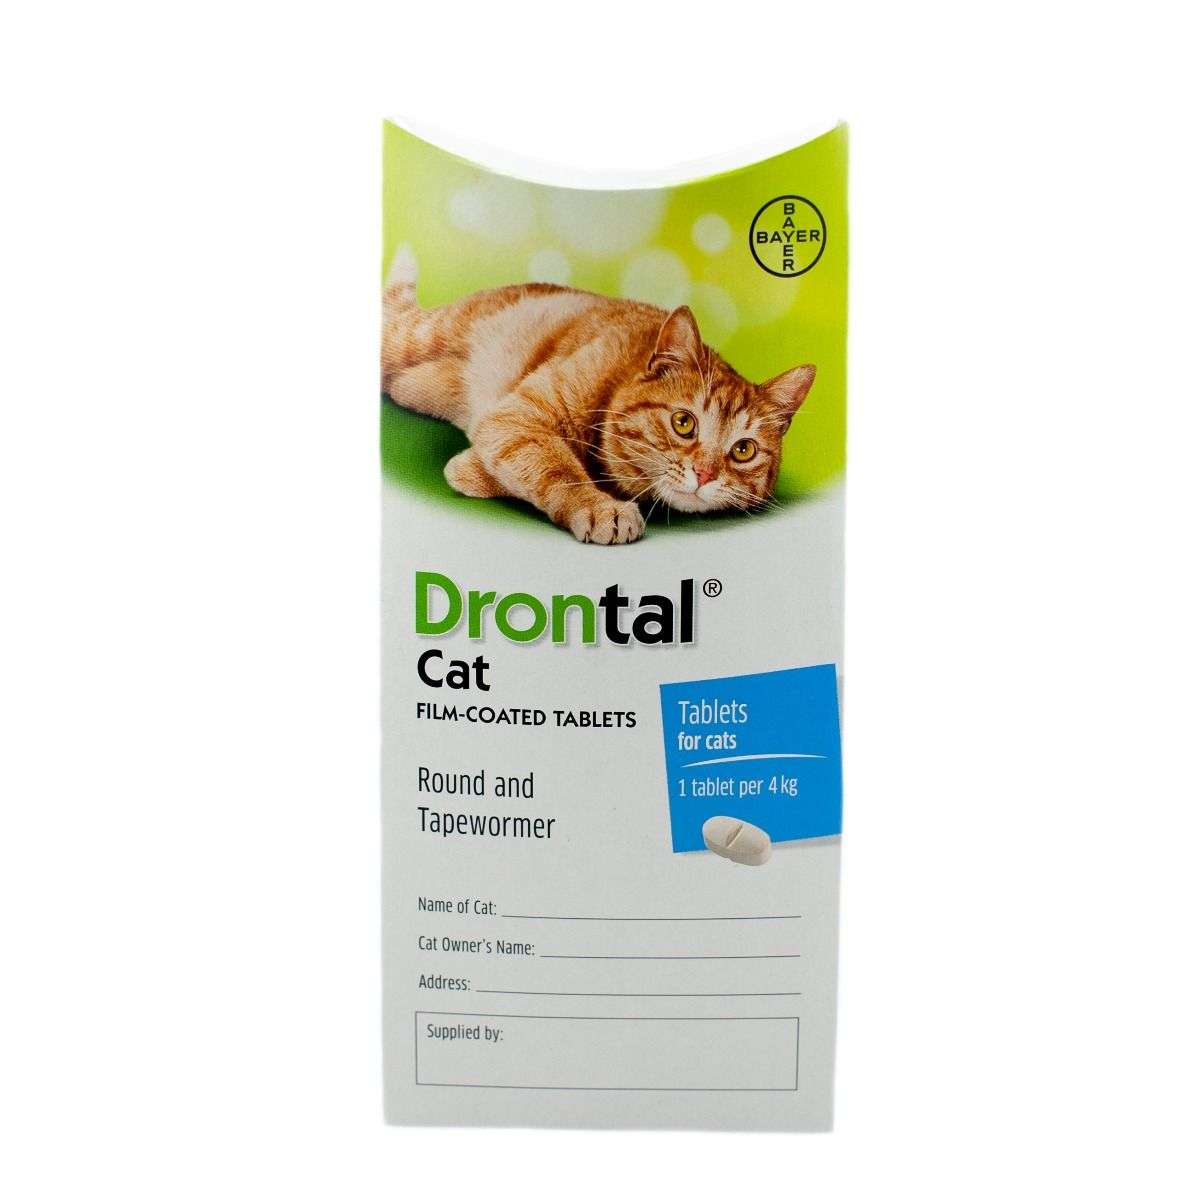 Drontal How Often To Give